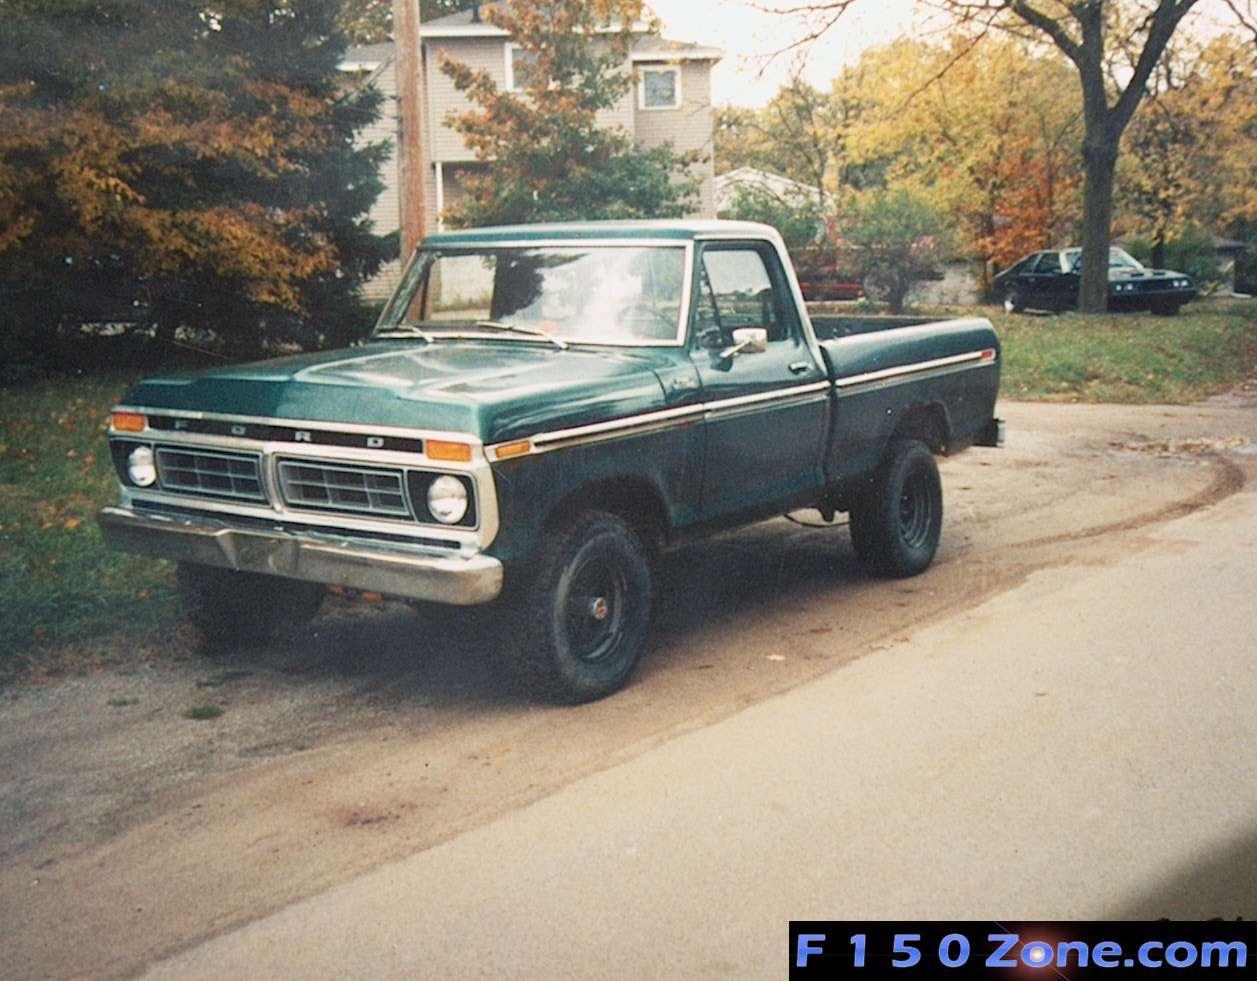 11-15-91 The Day I brought it home.jpg